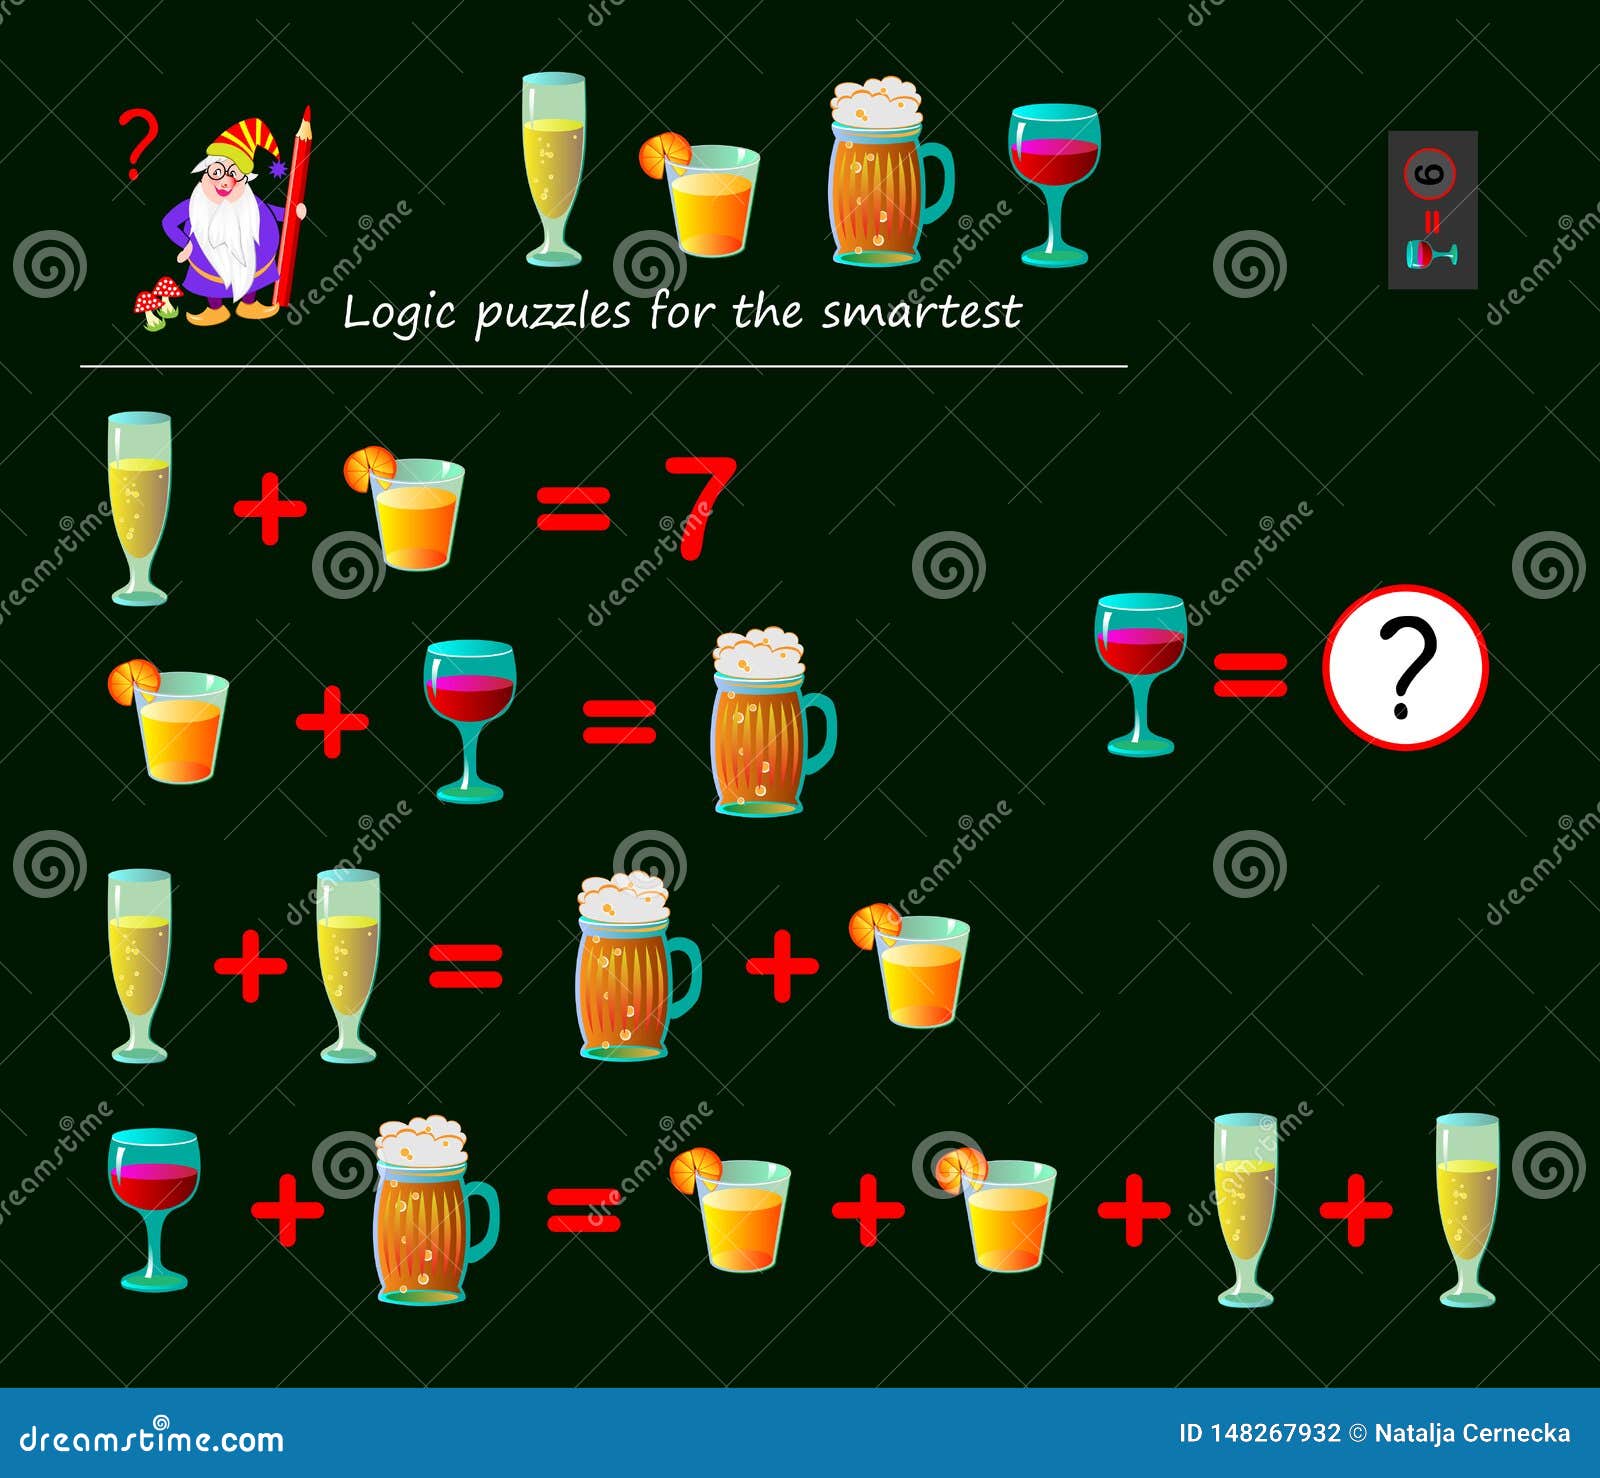 mathematical logic puzzle game for smartest. solve examples and count which of numbers corresponds to each of drink.